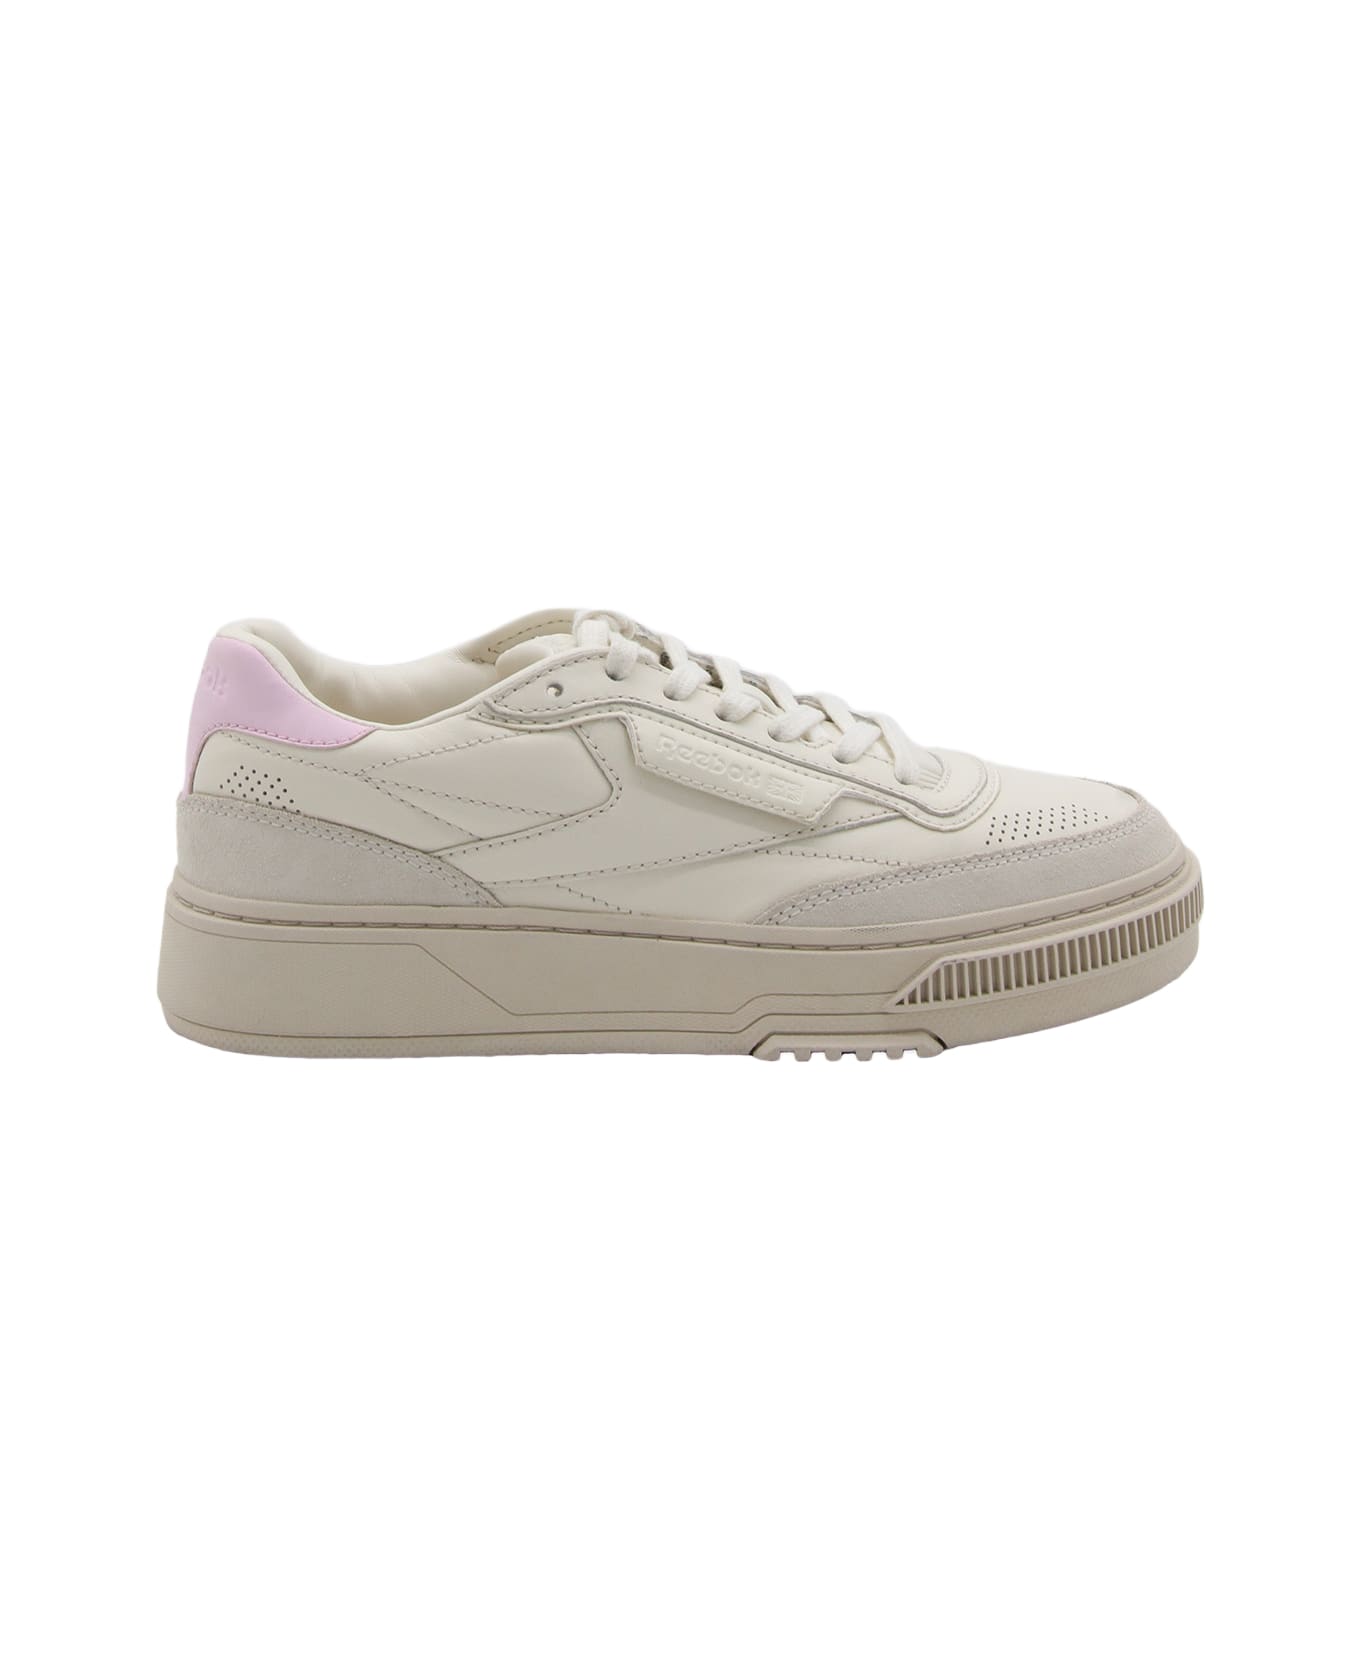 Reebok White And Pink Leather C Ltd Sneakers - Light pink